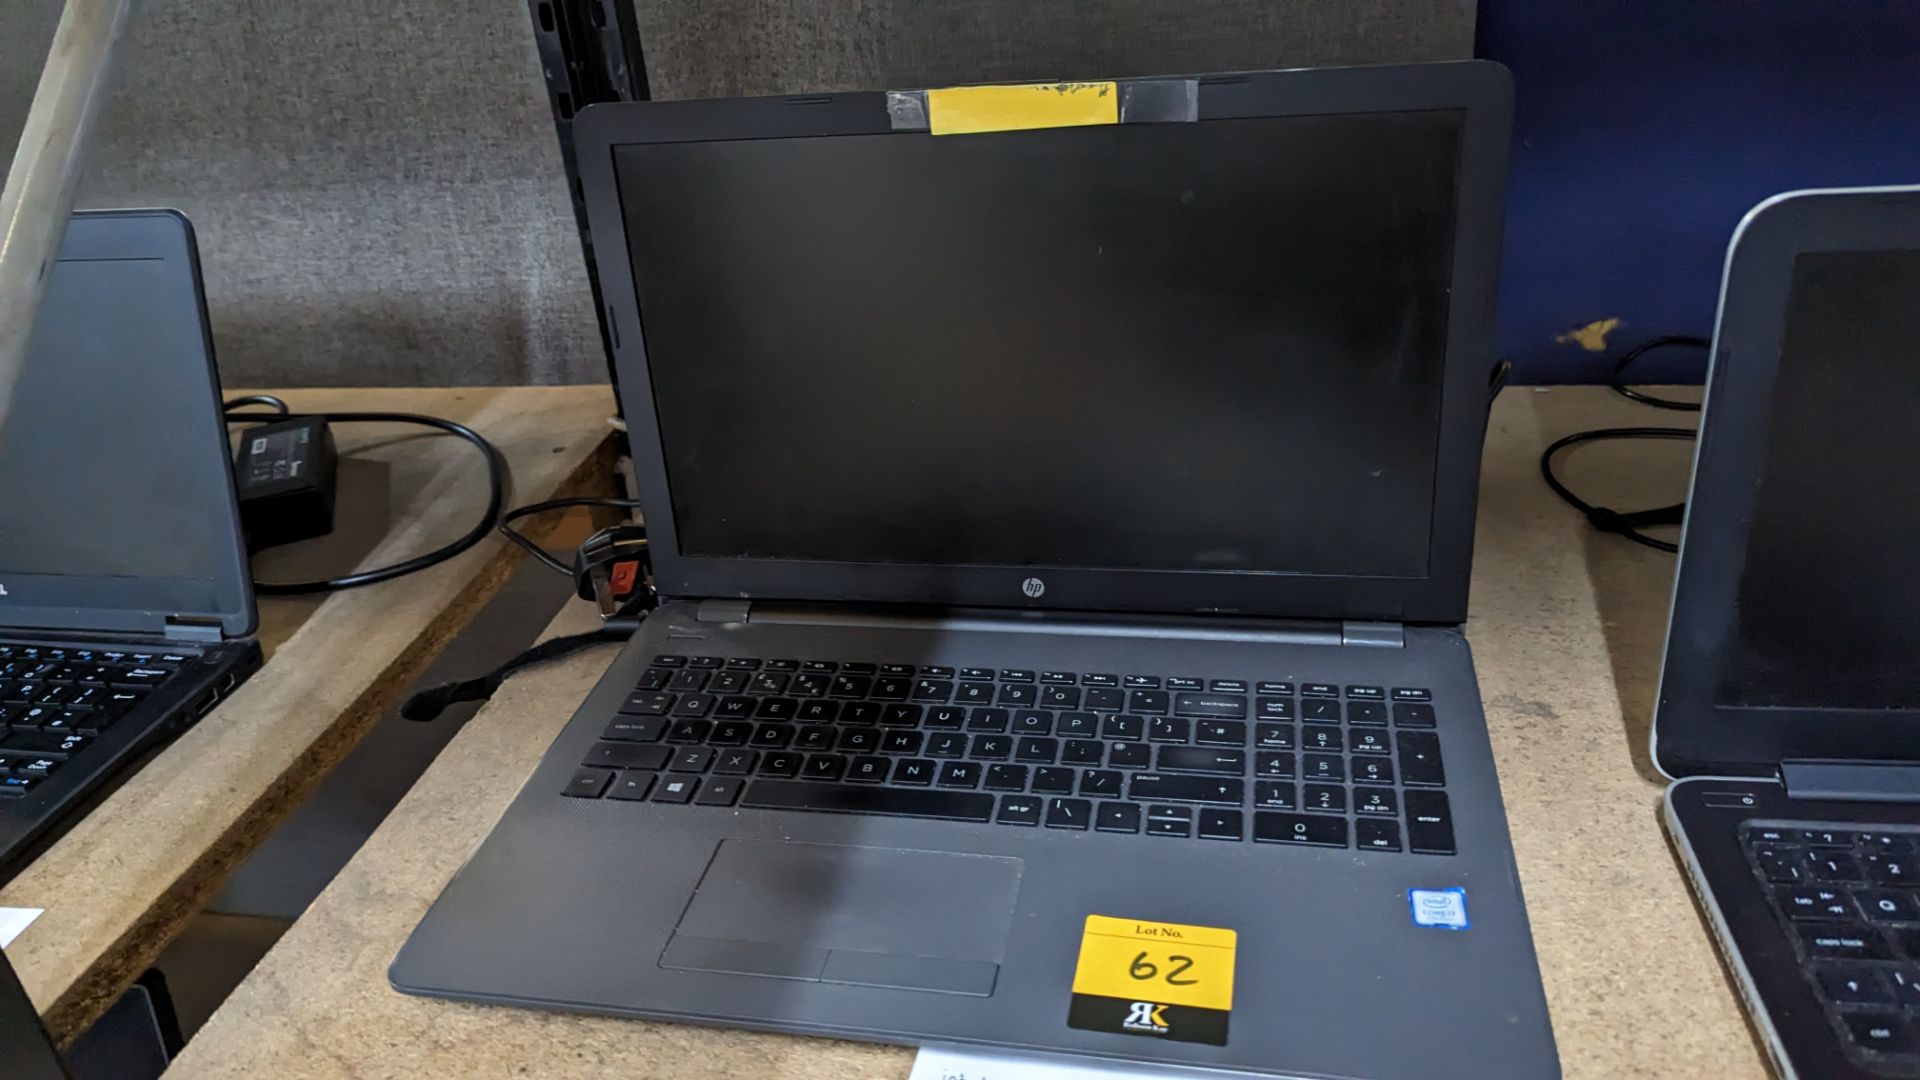 HP 250 notebook computer with Core i7-7500 CPU, 8GB RAM, 250 GB SSD, including power pack/charger - Image 4 of 12